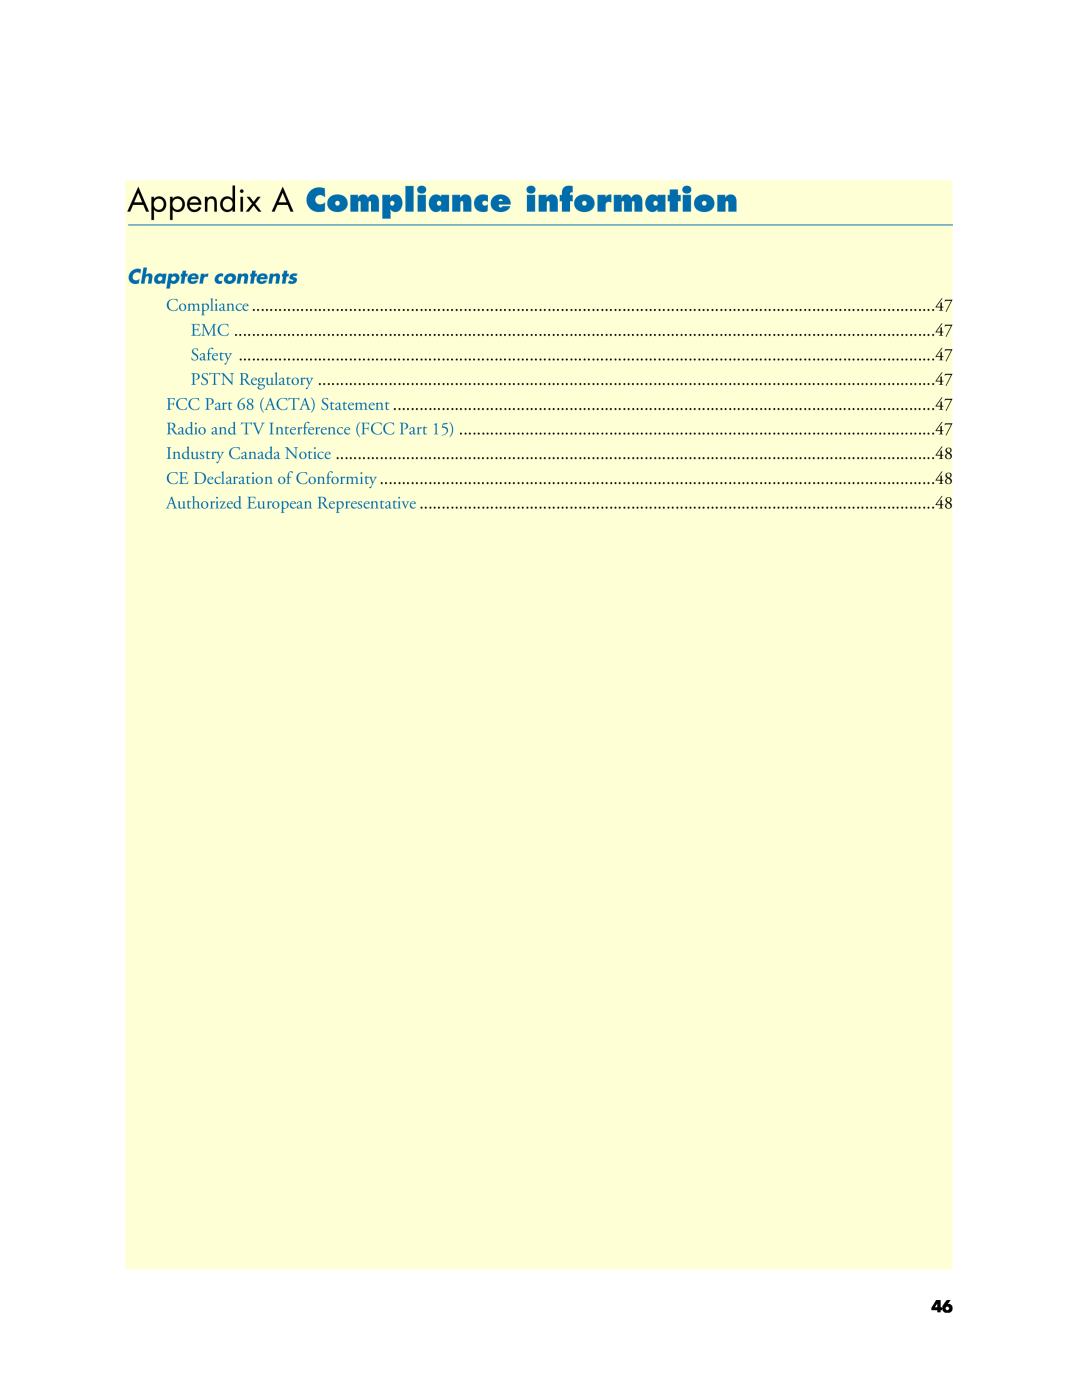 Patton electronic Model 3088/I manual Appendix A Compliance information, Chapter contents 